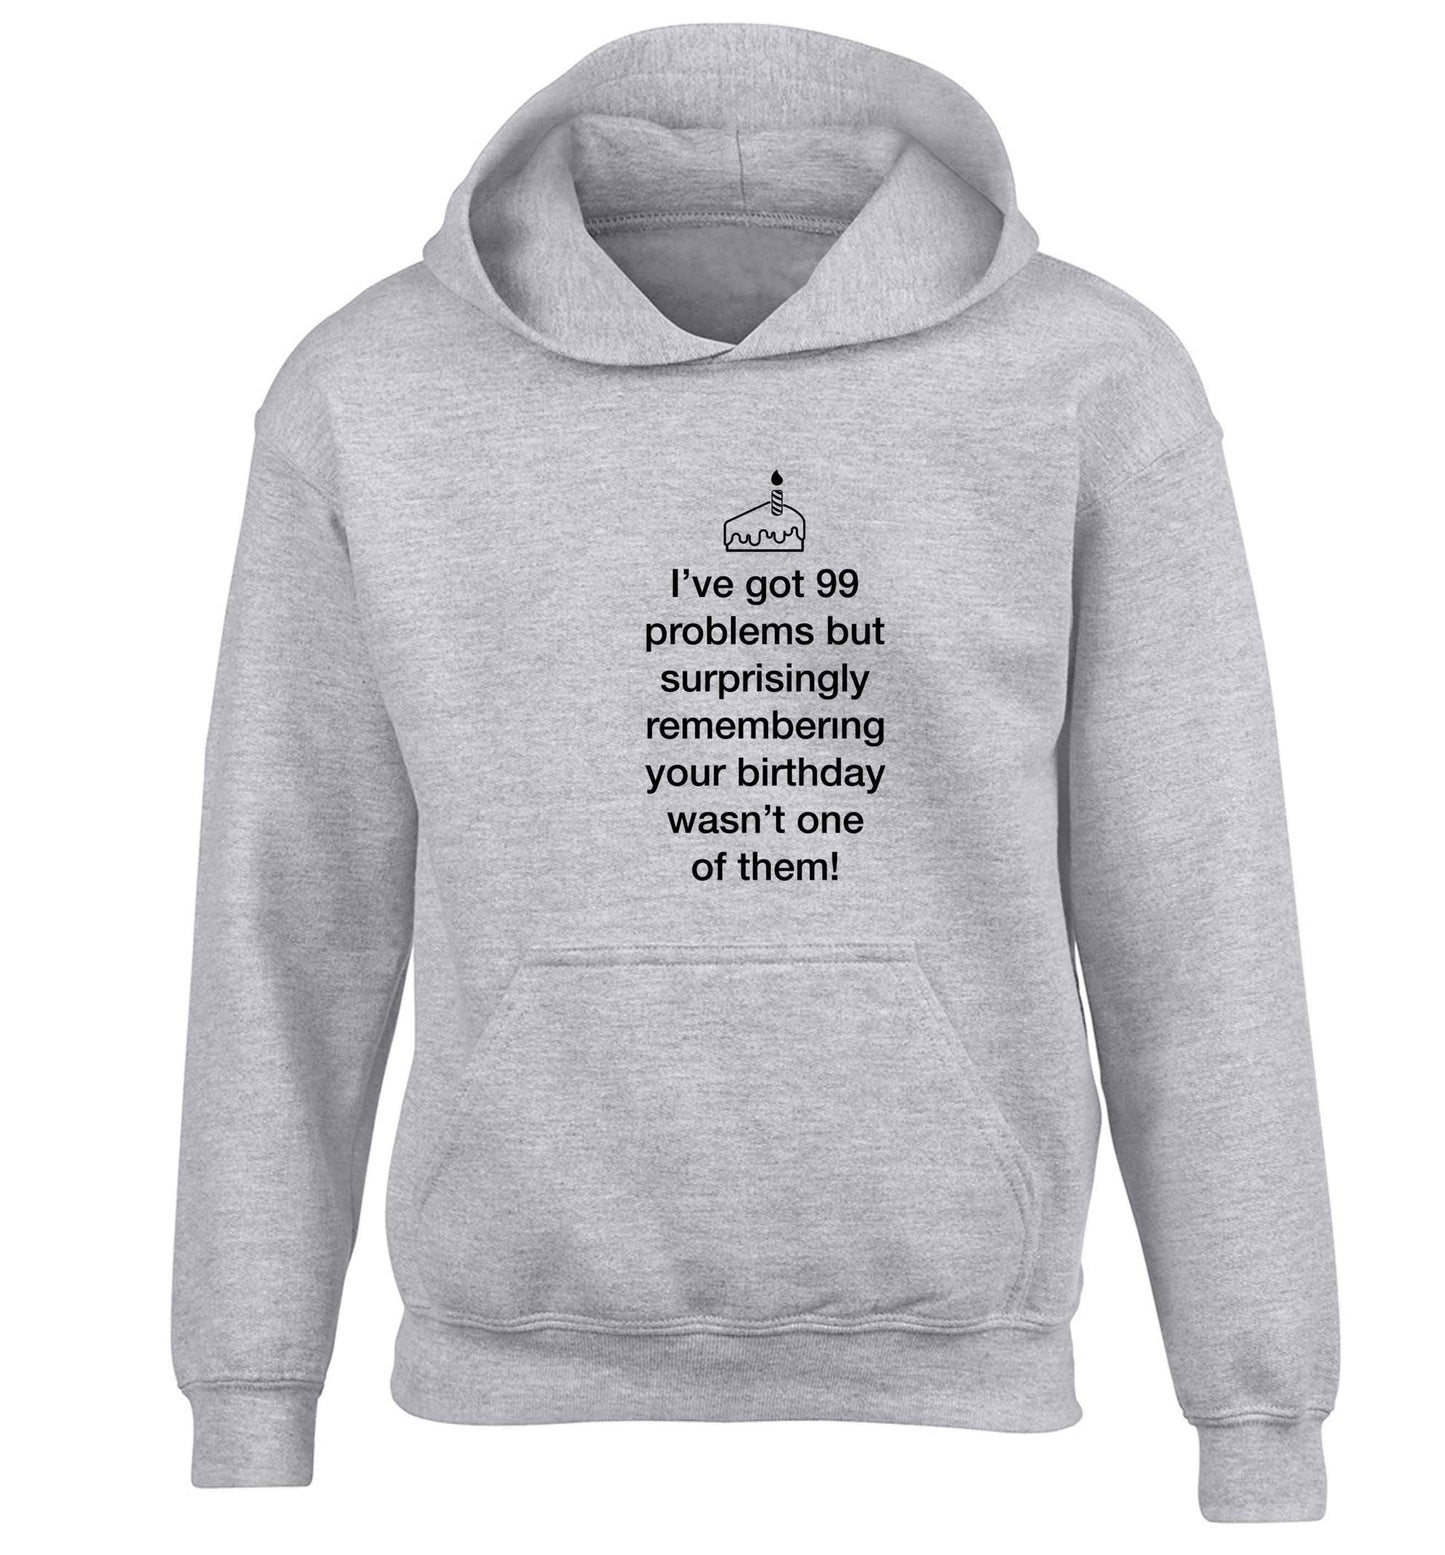 I've got 99 problems but surprisingly remembering your birthday wasn't one of them! children's grey hoodie 12-13 Years